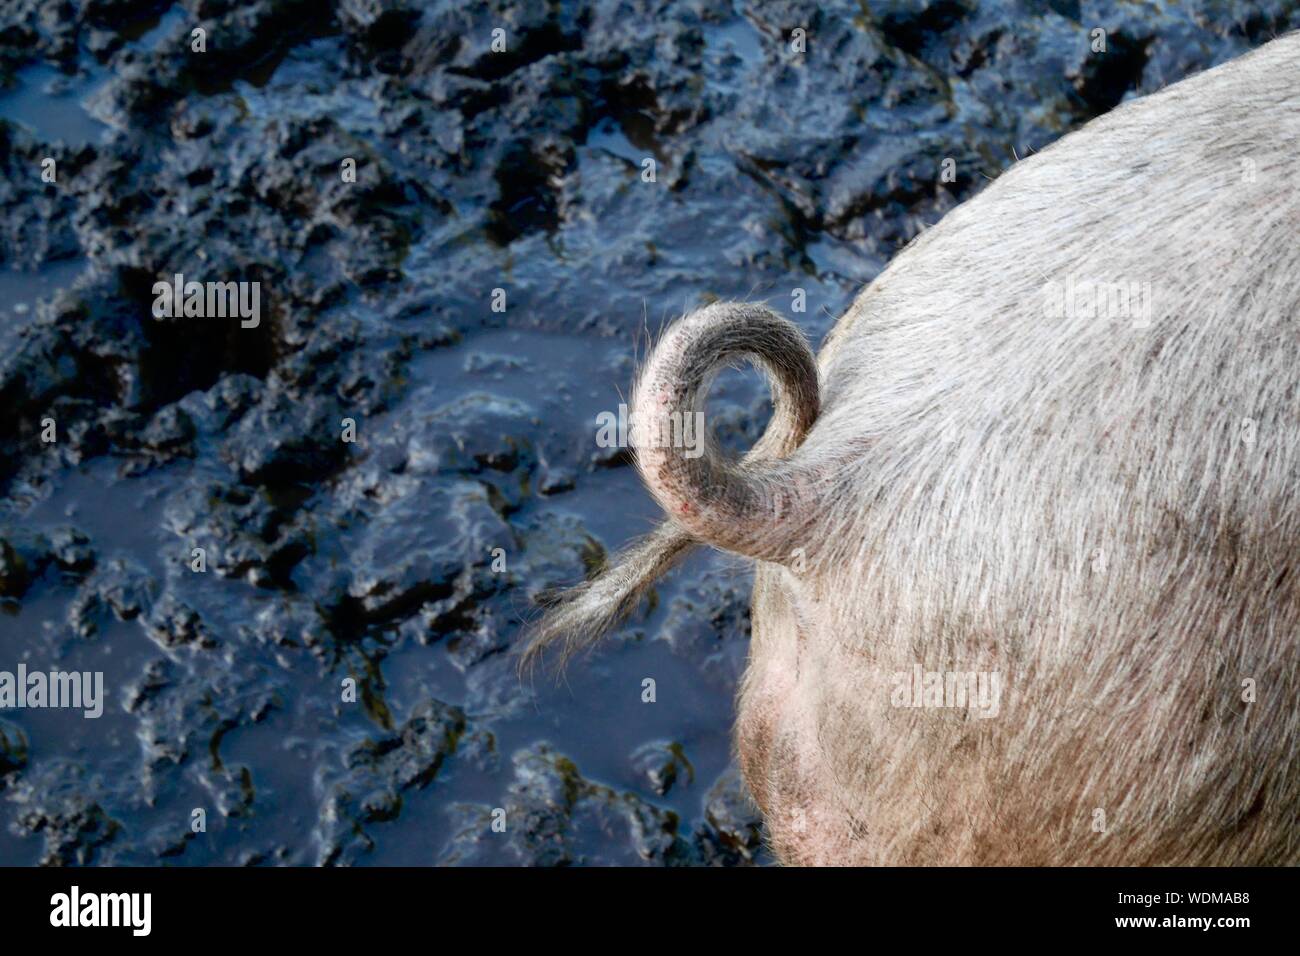 Close-up Of Curly Pigtail Against Mud Stock Photo